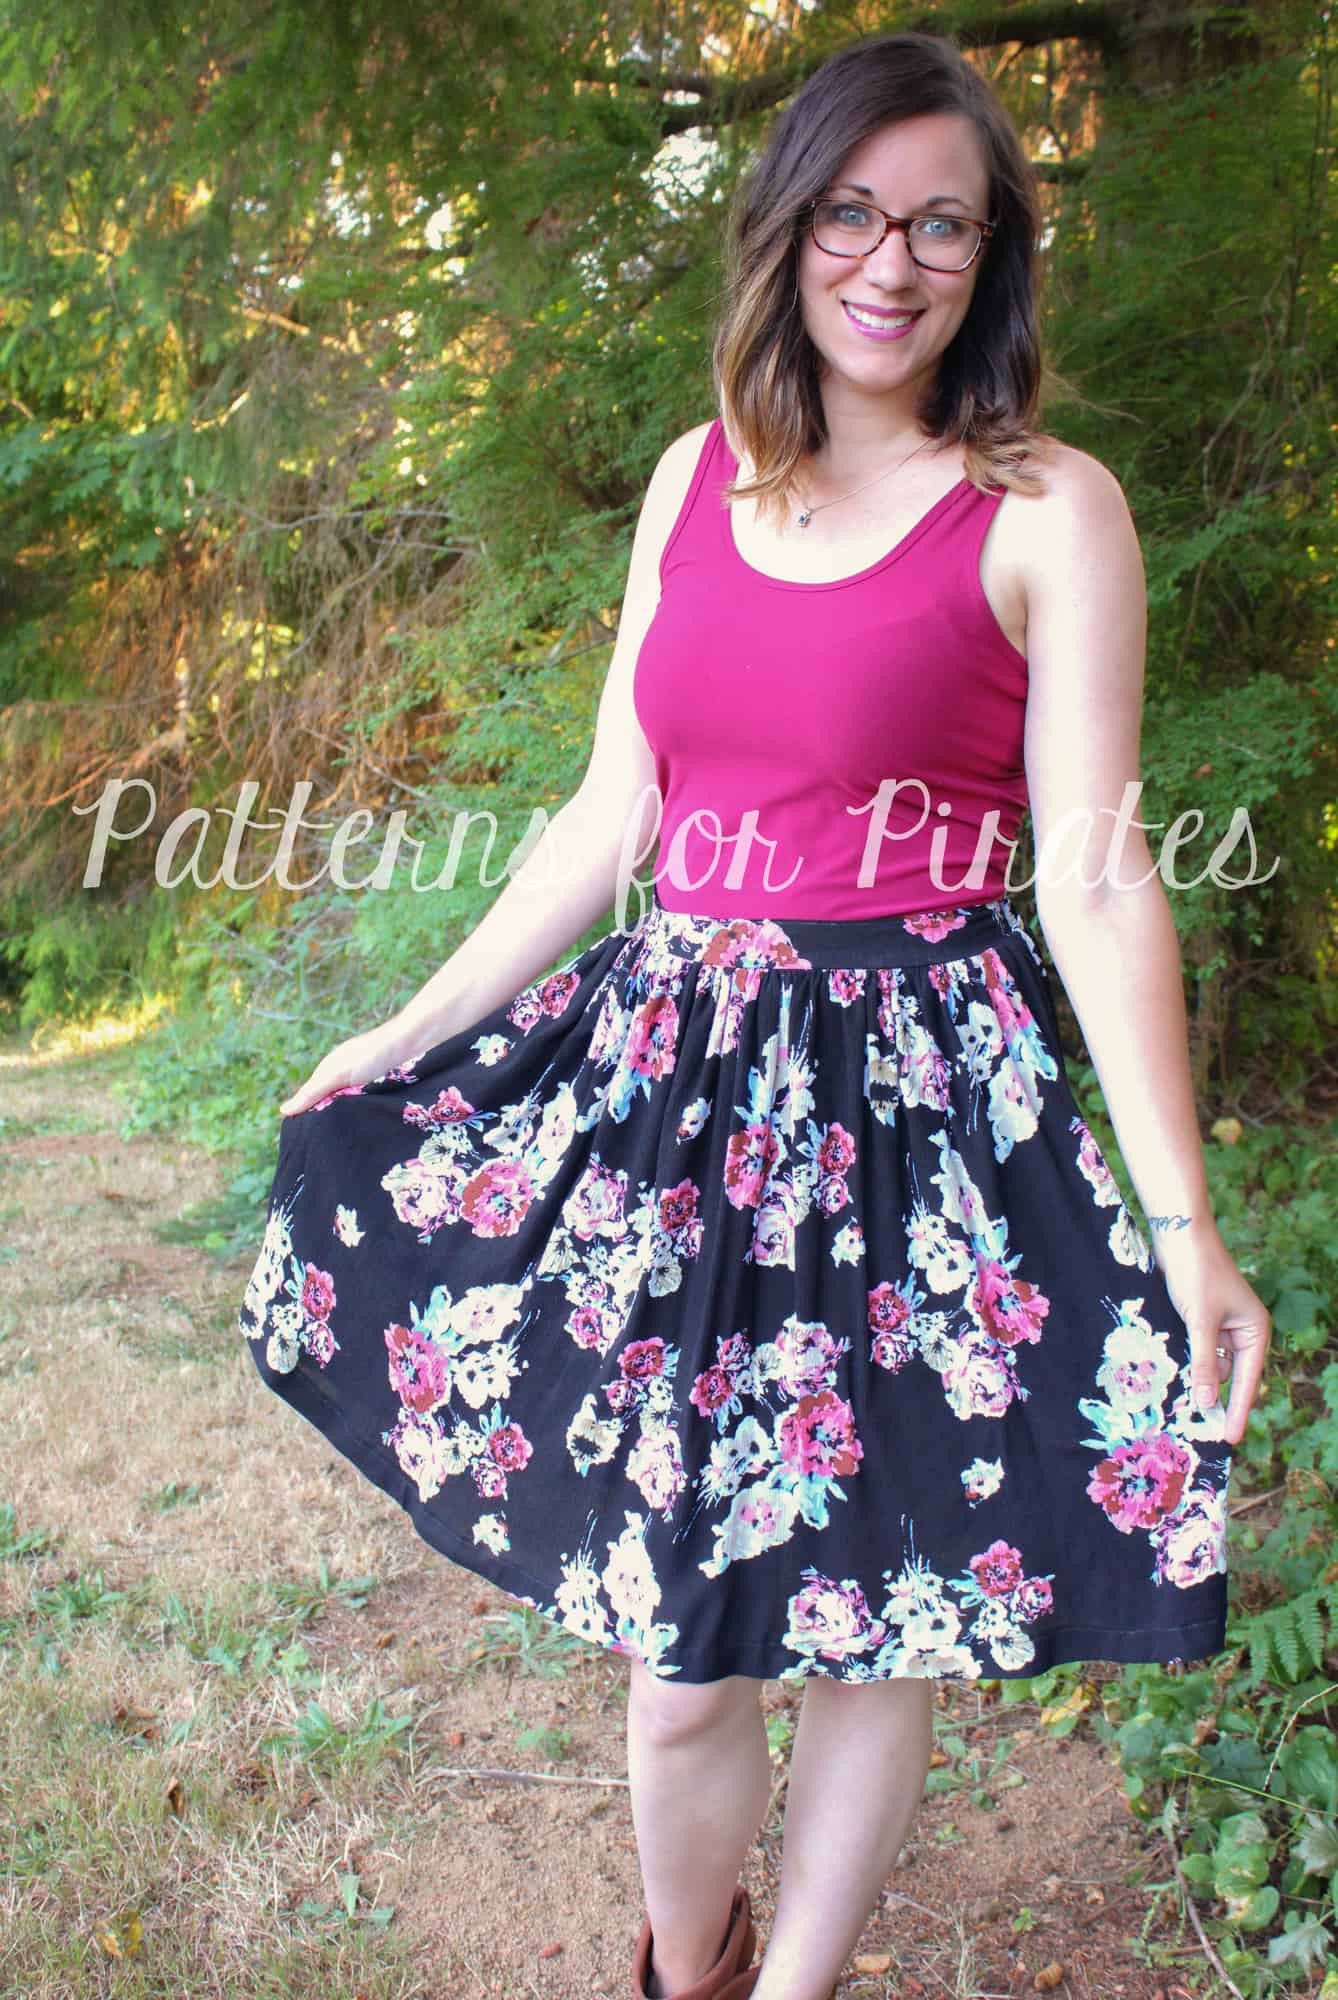 So Classic Sundress Hacks - Patterns for Pirates